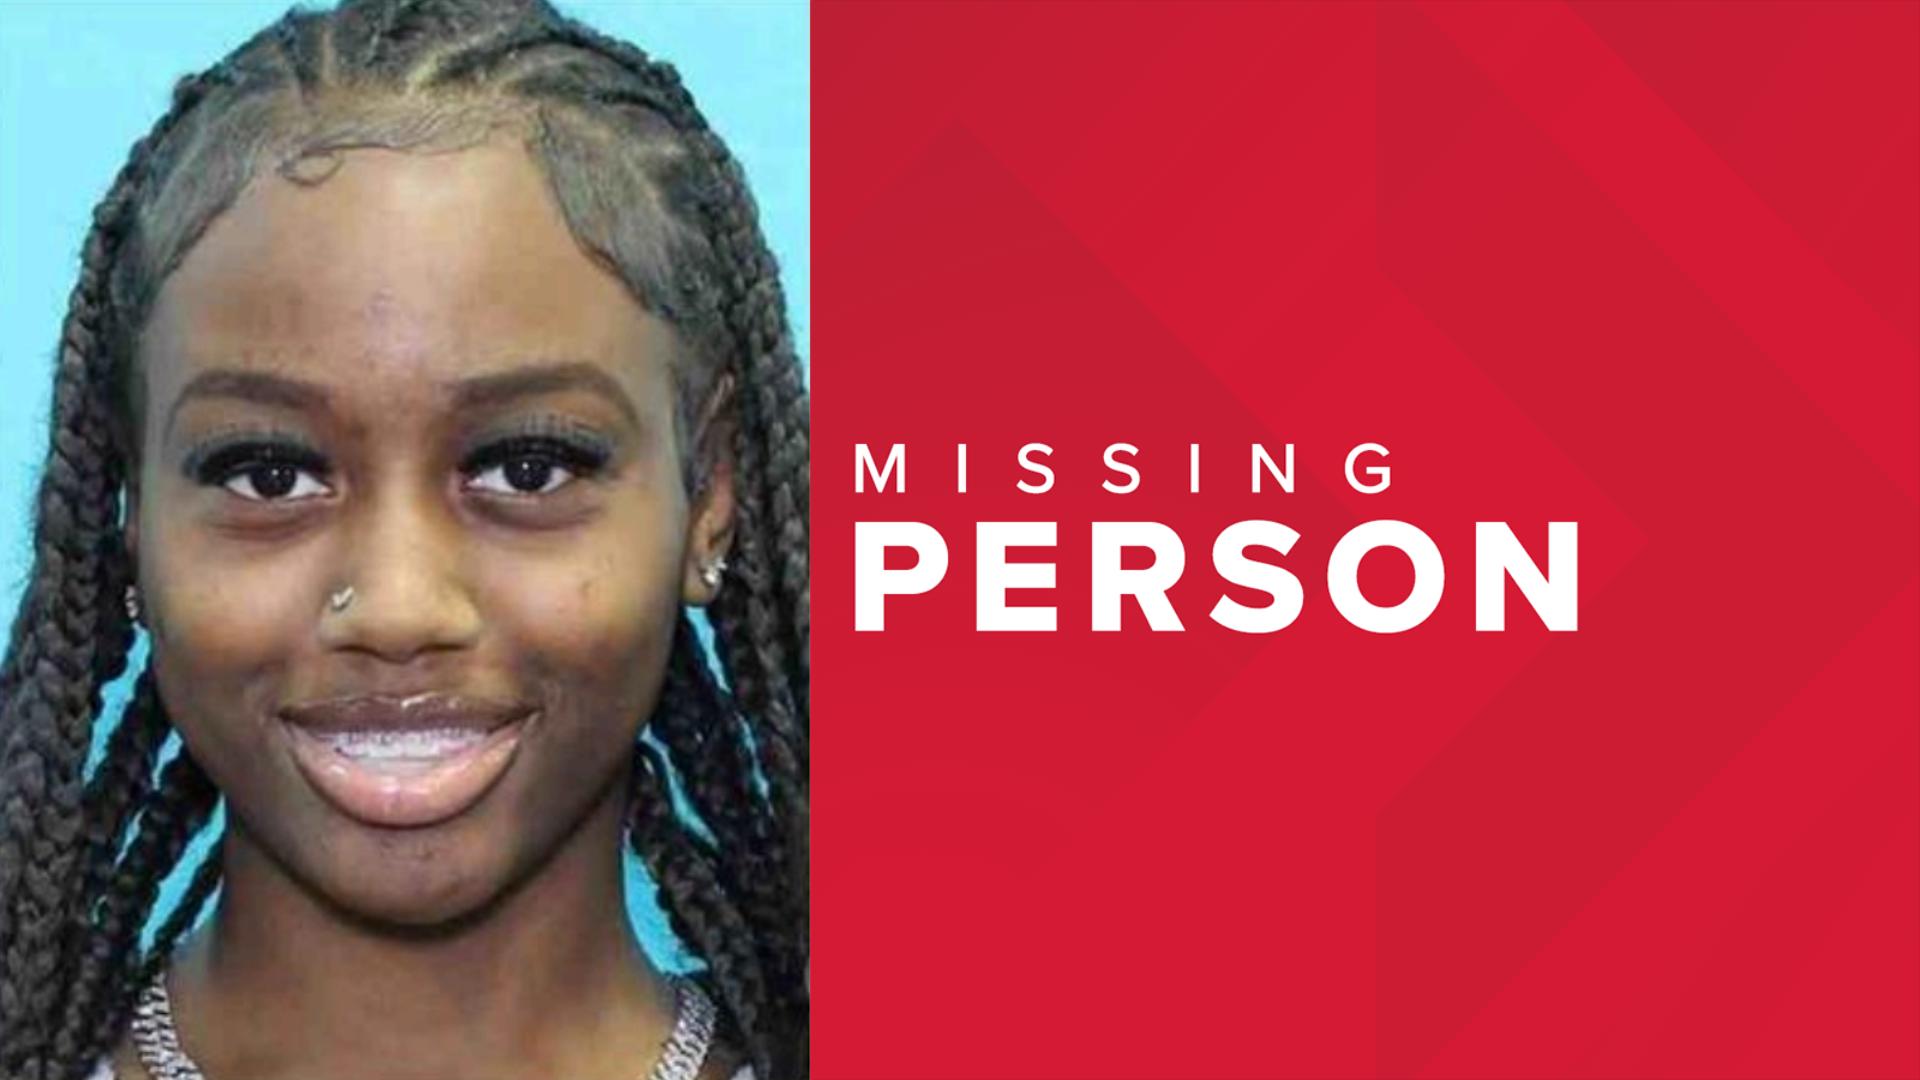 Police said the missing teen has a diagnosed medical condition.